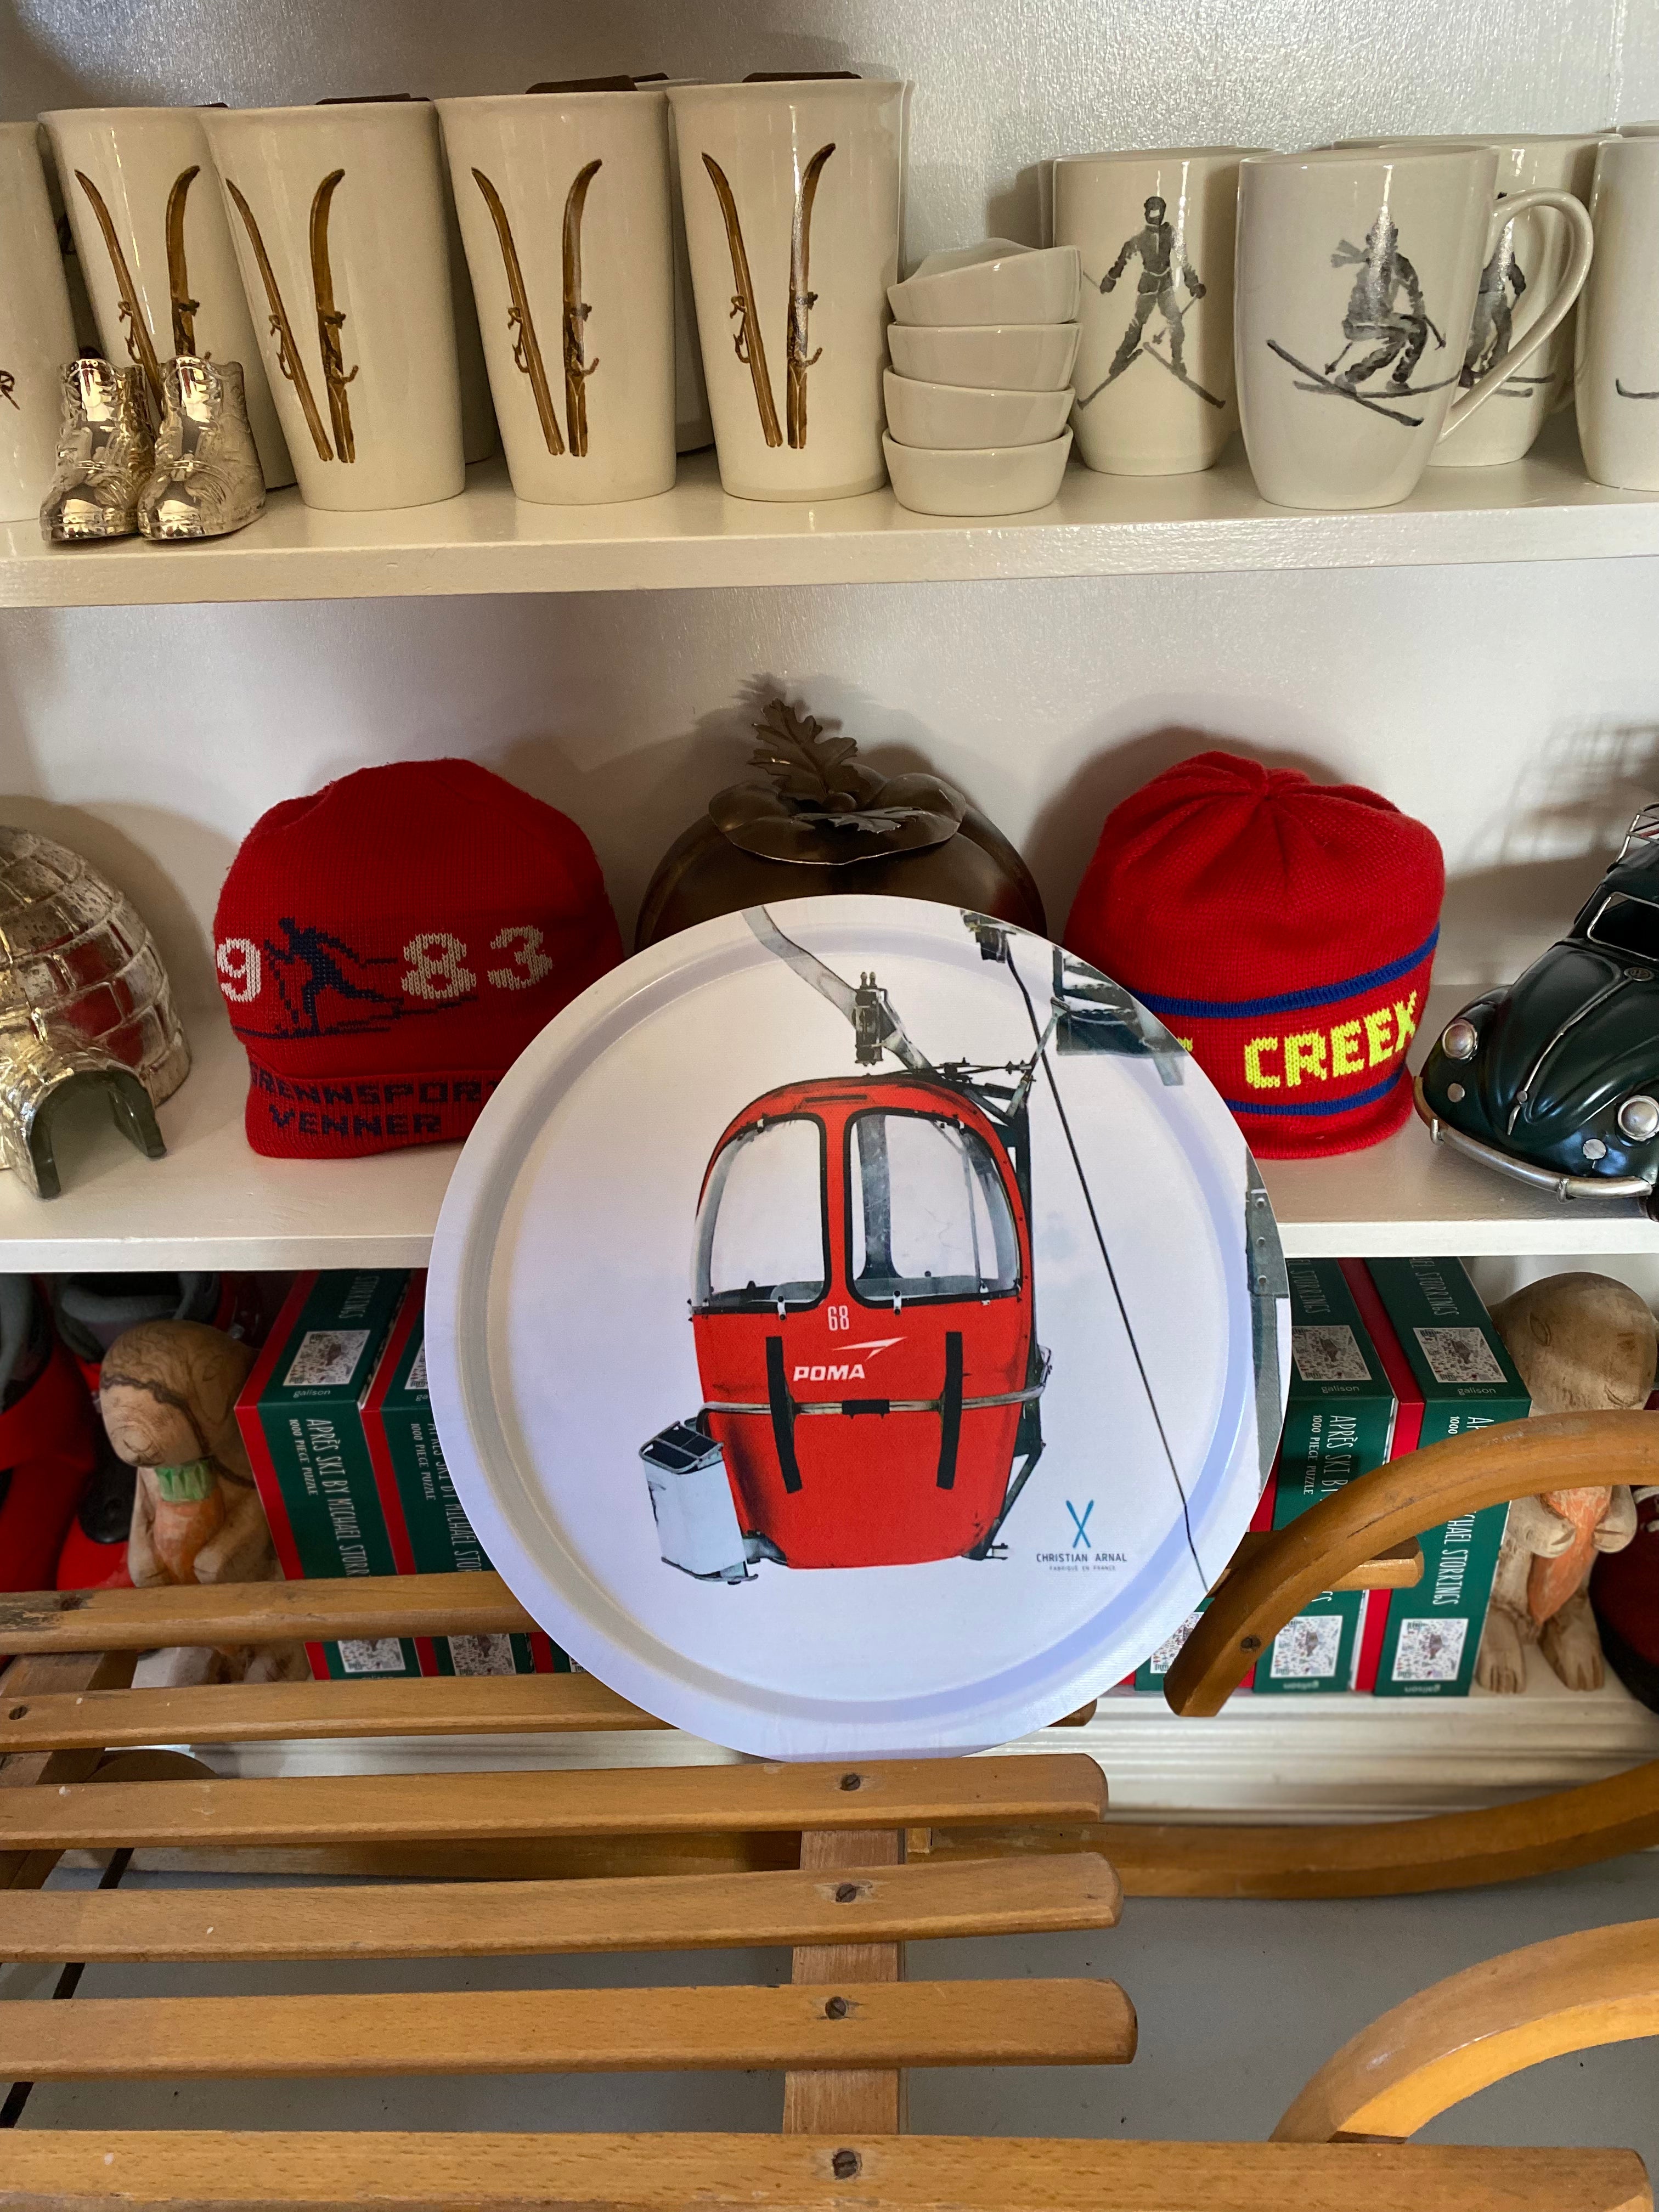 Photo of a Red Vintage Gondola printed onto a Round White Serving Tray, resting on a vintage wooden sled in front of a white bookshelf filled with snow related products